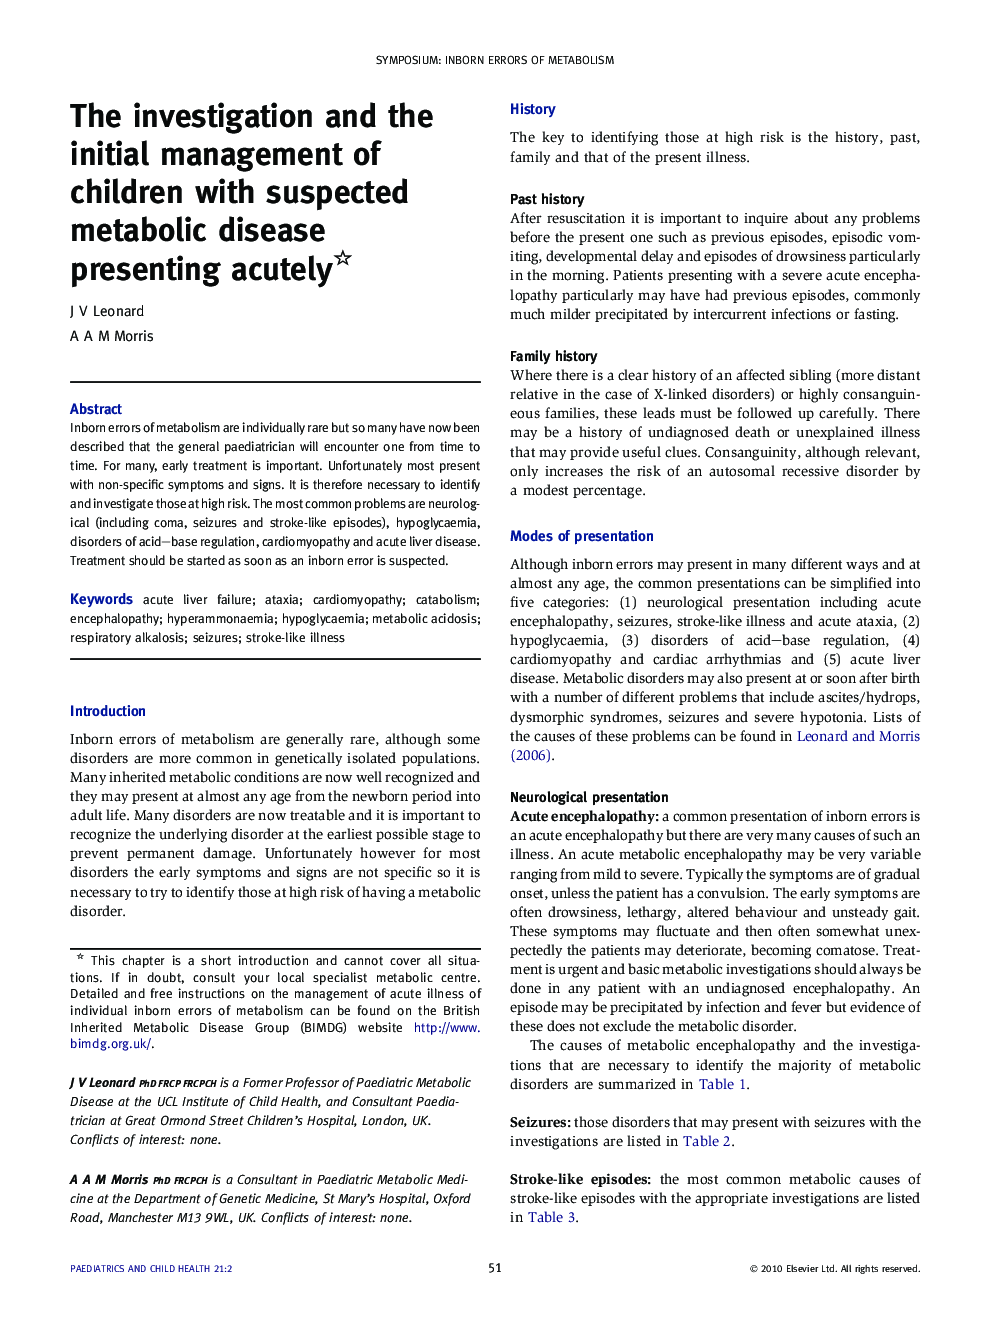 The investigation and the initial management of children with suspected metabolic disease presenting acutely 